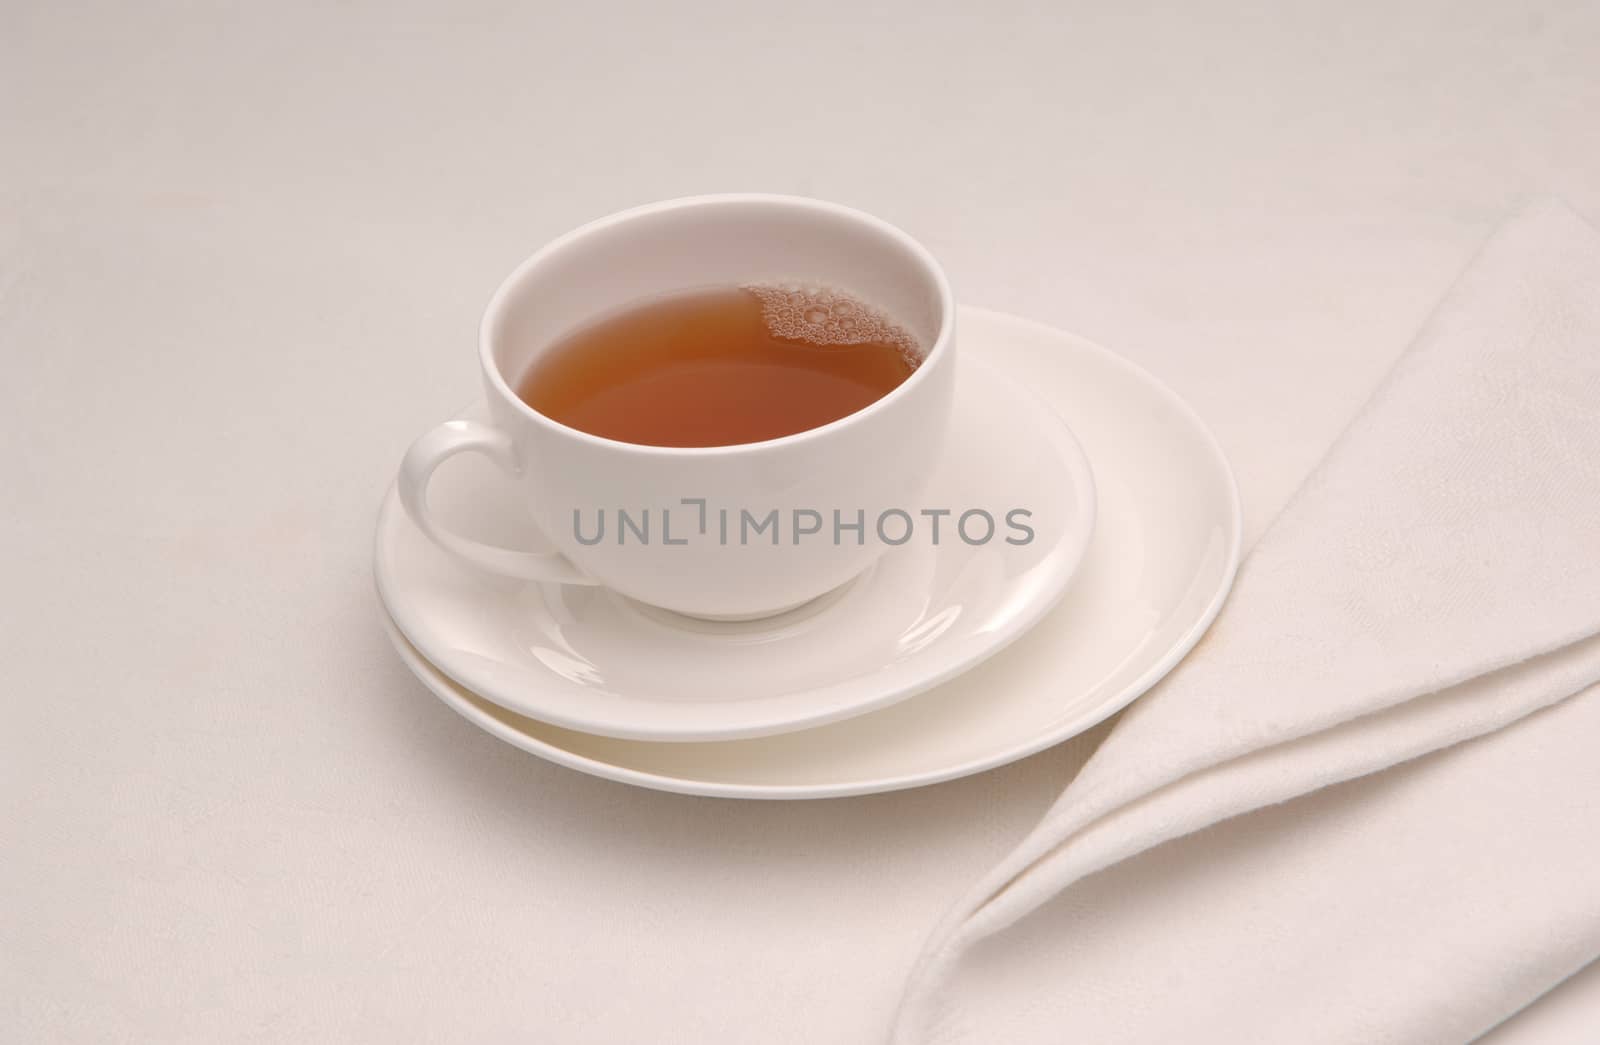 on white napkin with a cup of tea tea on the saucer